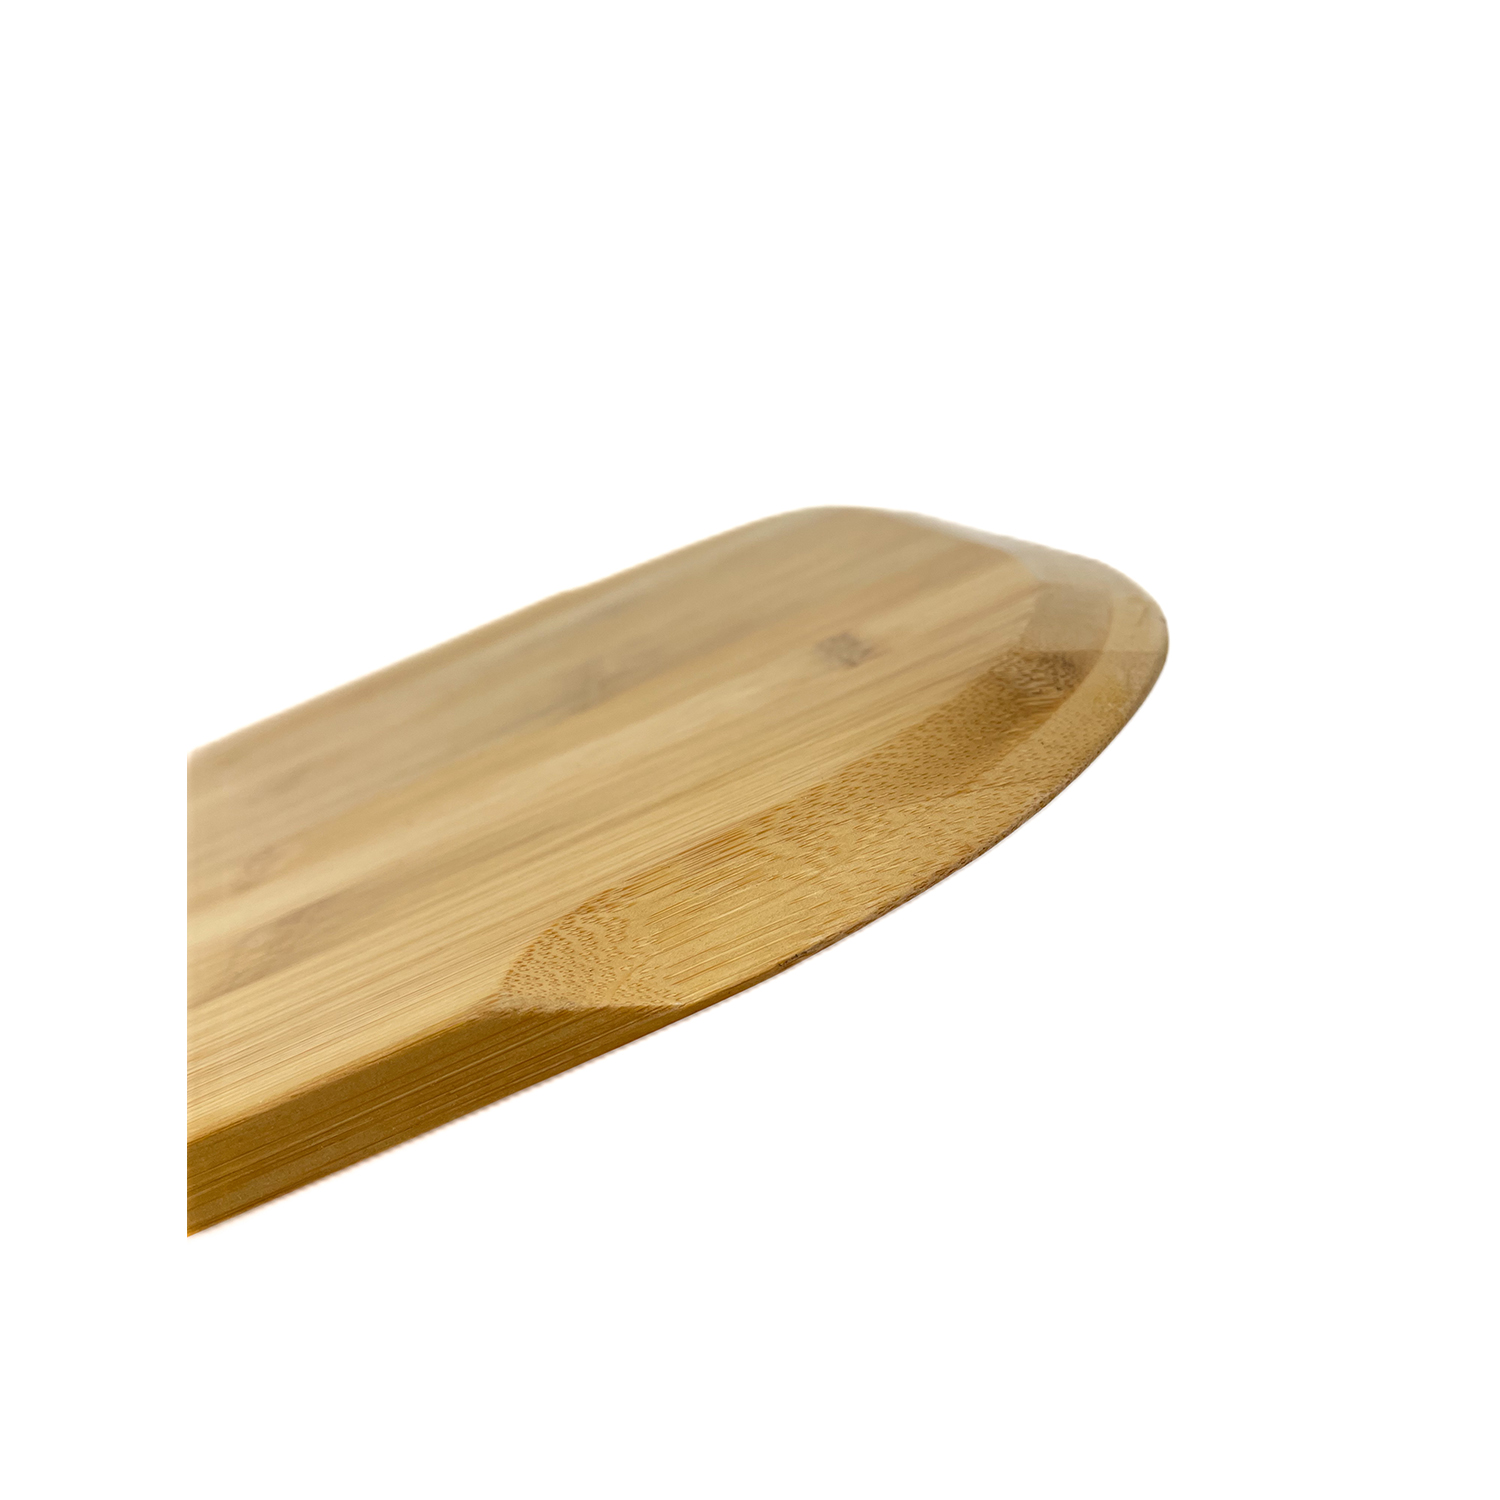 Wholesale Pizza Tray Bamboo Pizza Board Dinner Baked Cheese Cutting Board with Handles